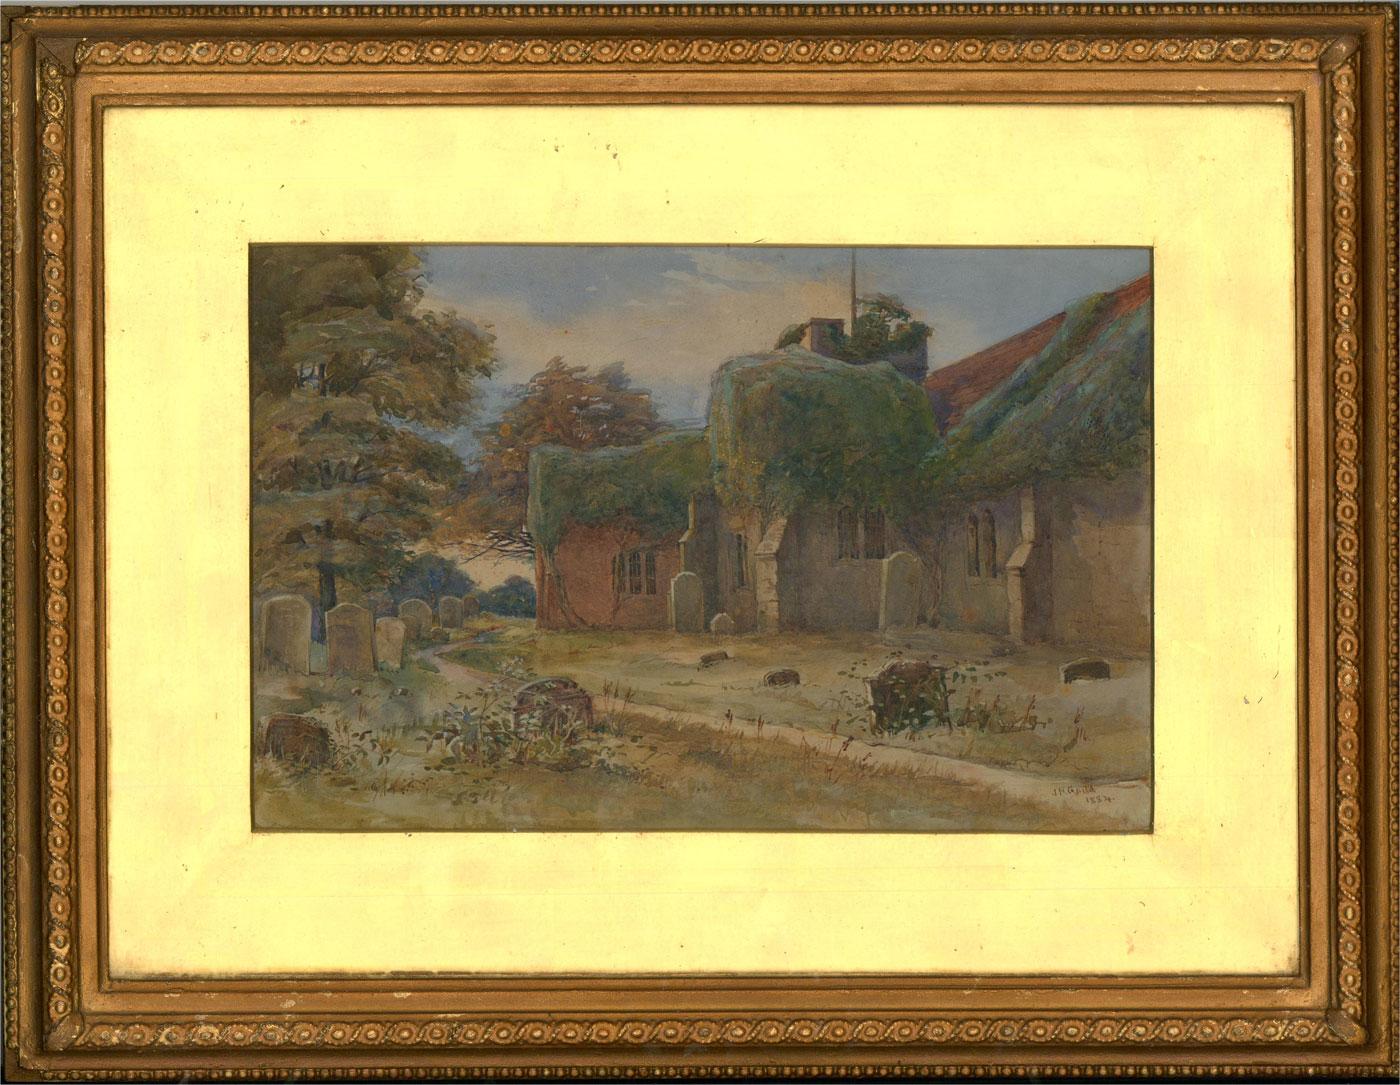 A pretty rural church, overgrown with ivy with a path winding through its graveyard. This watercolour has been signed and dated by the artist in the lower right corner.

The painting has been presented in a gilt effect frame with glazing and a gilt